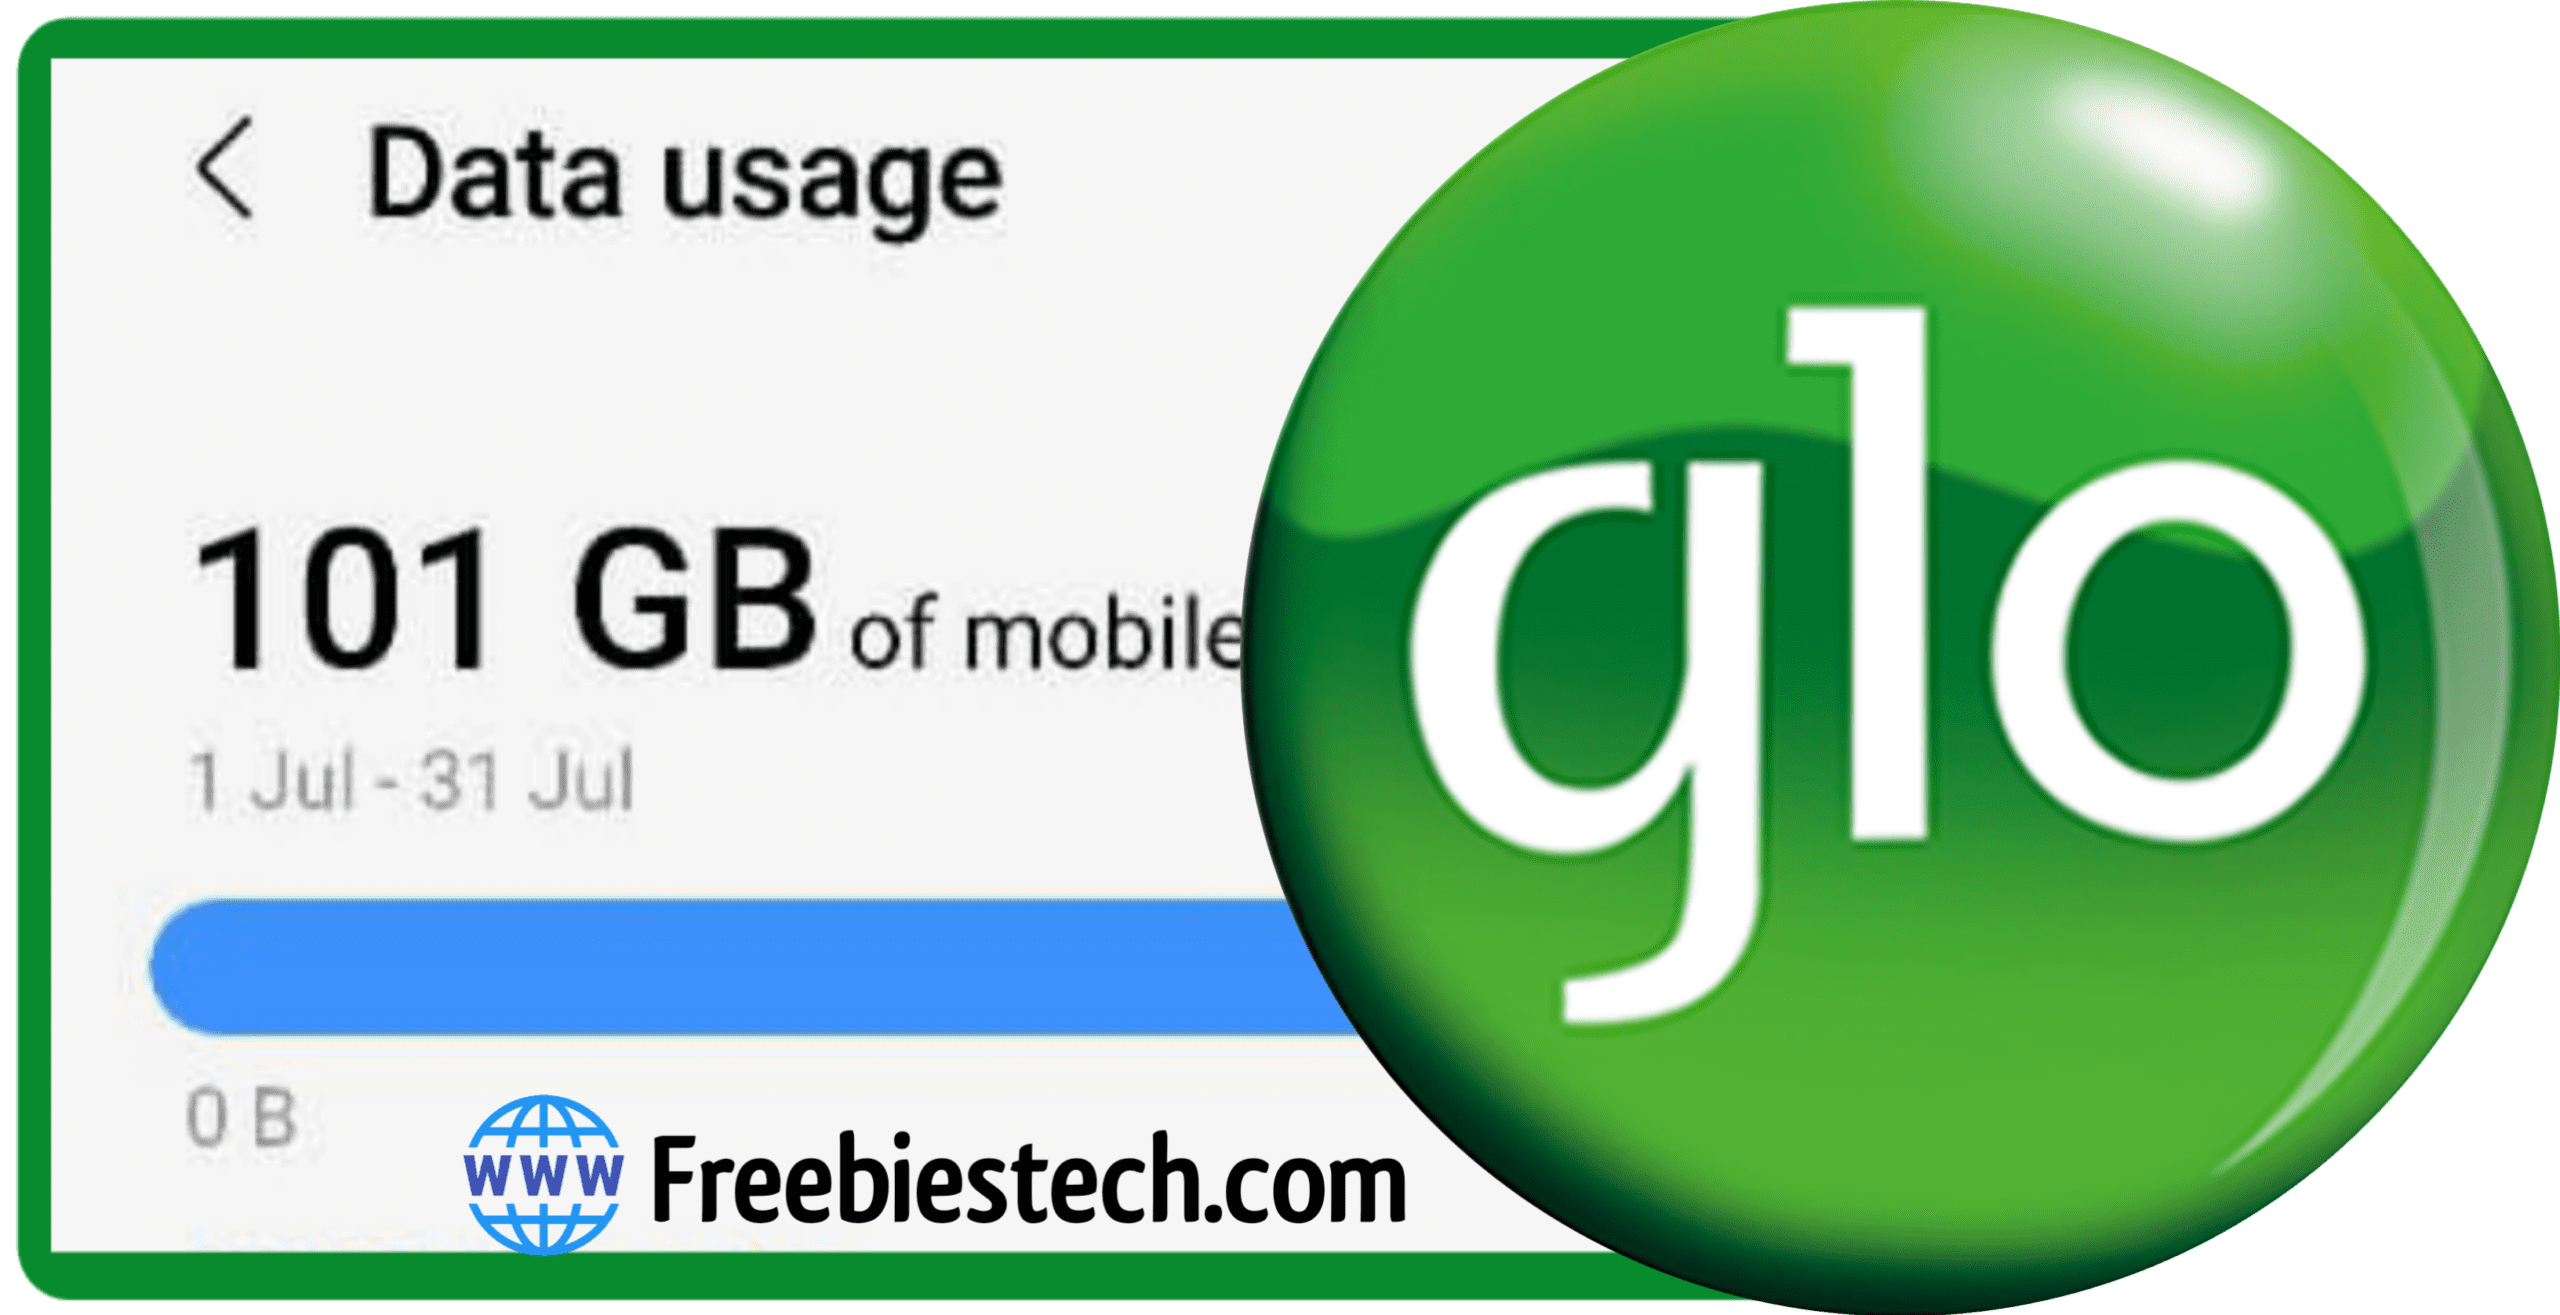 How To Activate Glo Unlimited Cheat Using Xvpn, Psiphon, Thunder or NicVpn